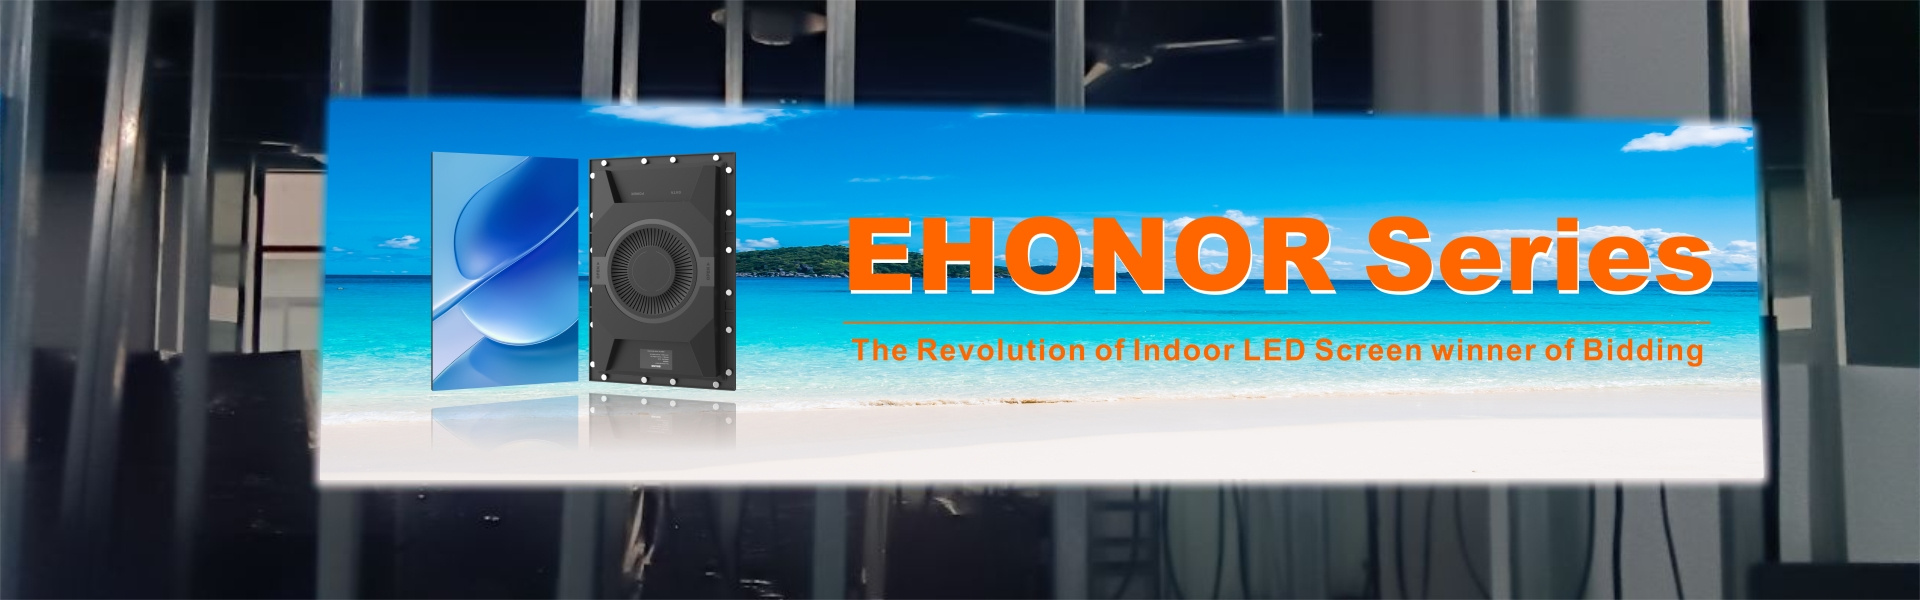 P2.5 indoor led screen-Ehonor-BANNER